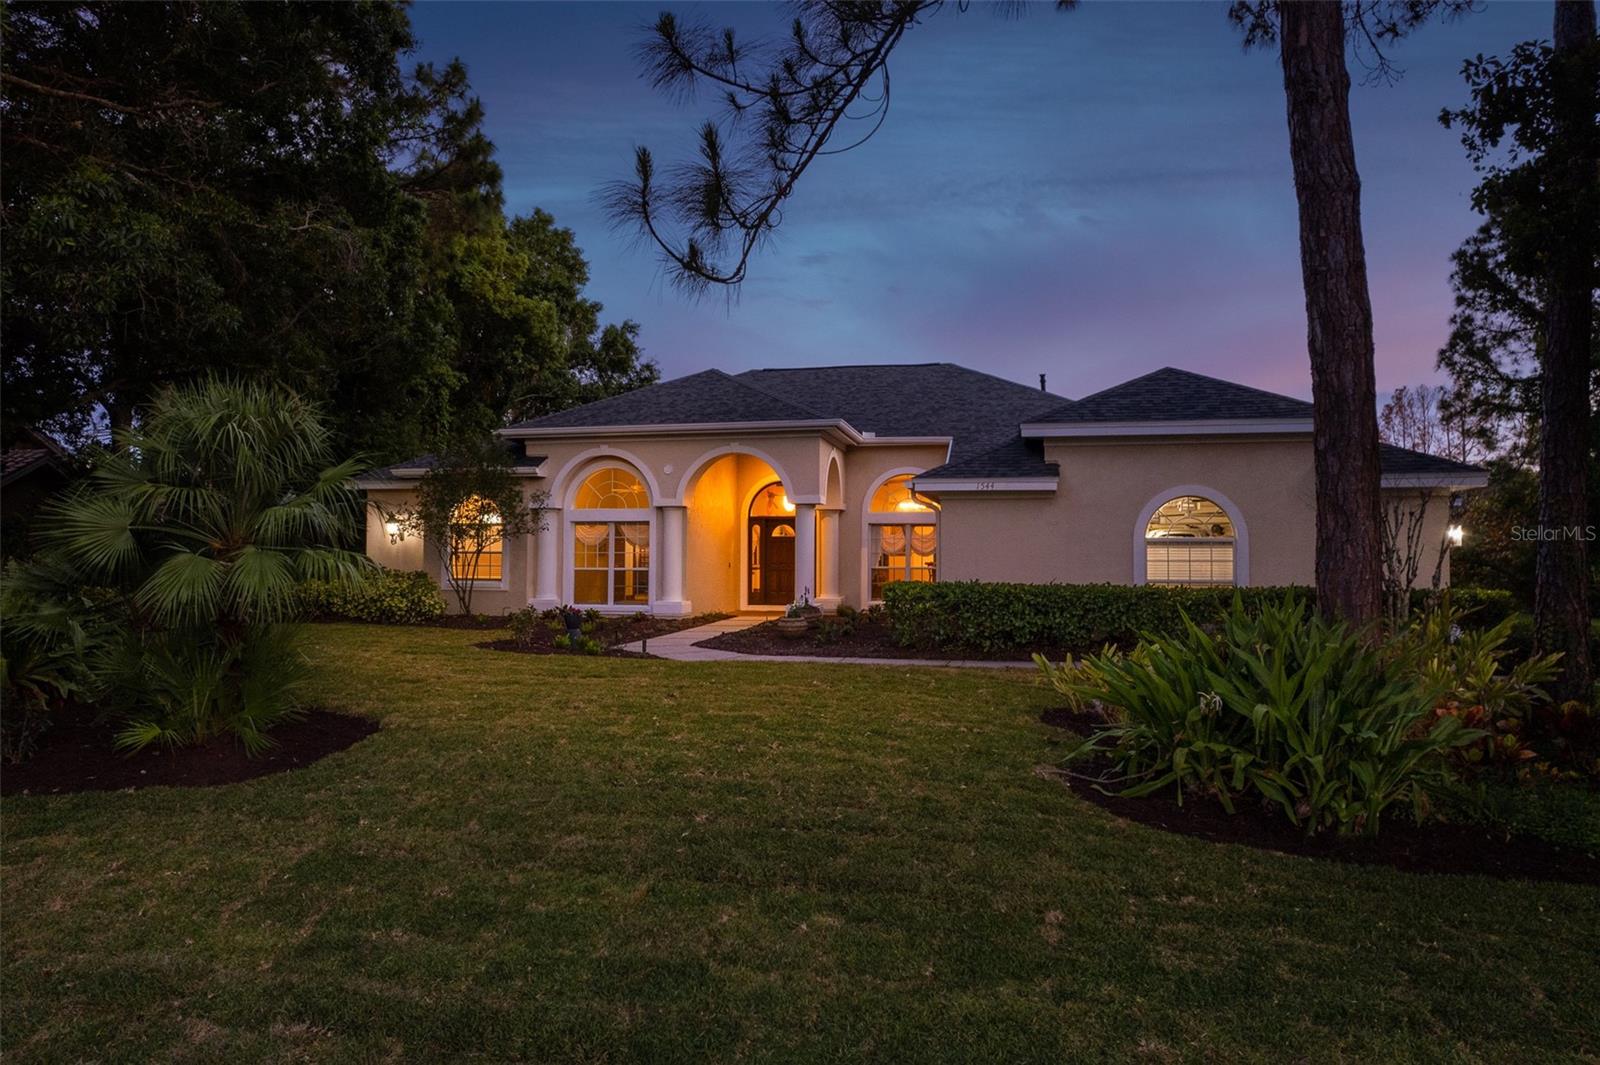 Capture the enchanting beauty of the front of your home in twilight photos, where the soft glow of the evening sky casts a magical aura over the elegant facade, creating a captivating scene that beckons with warmth and charm.